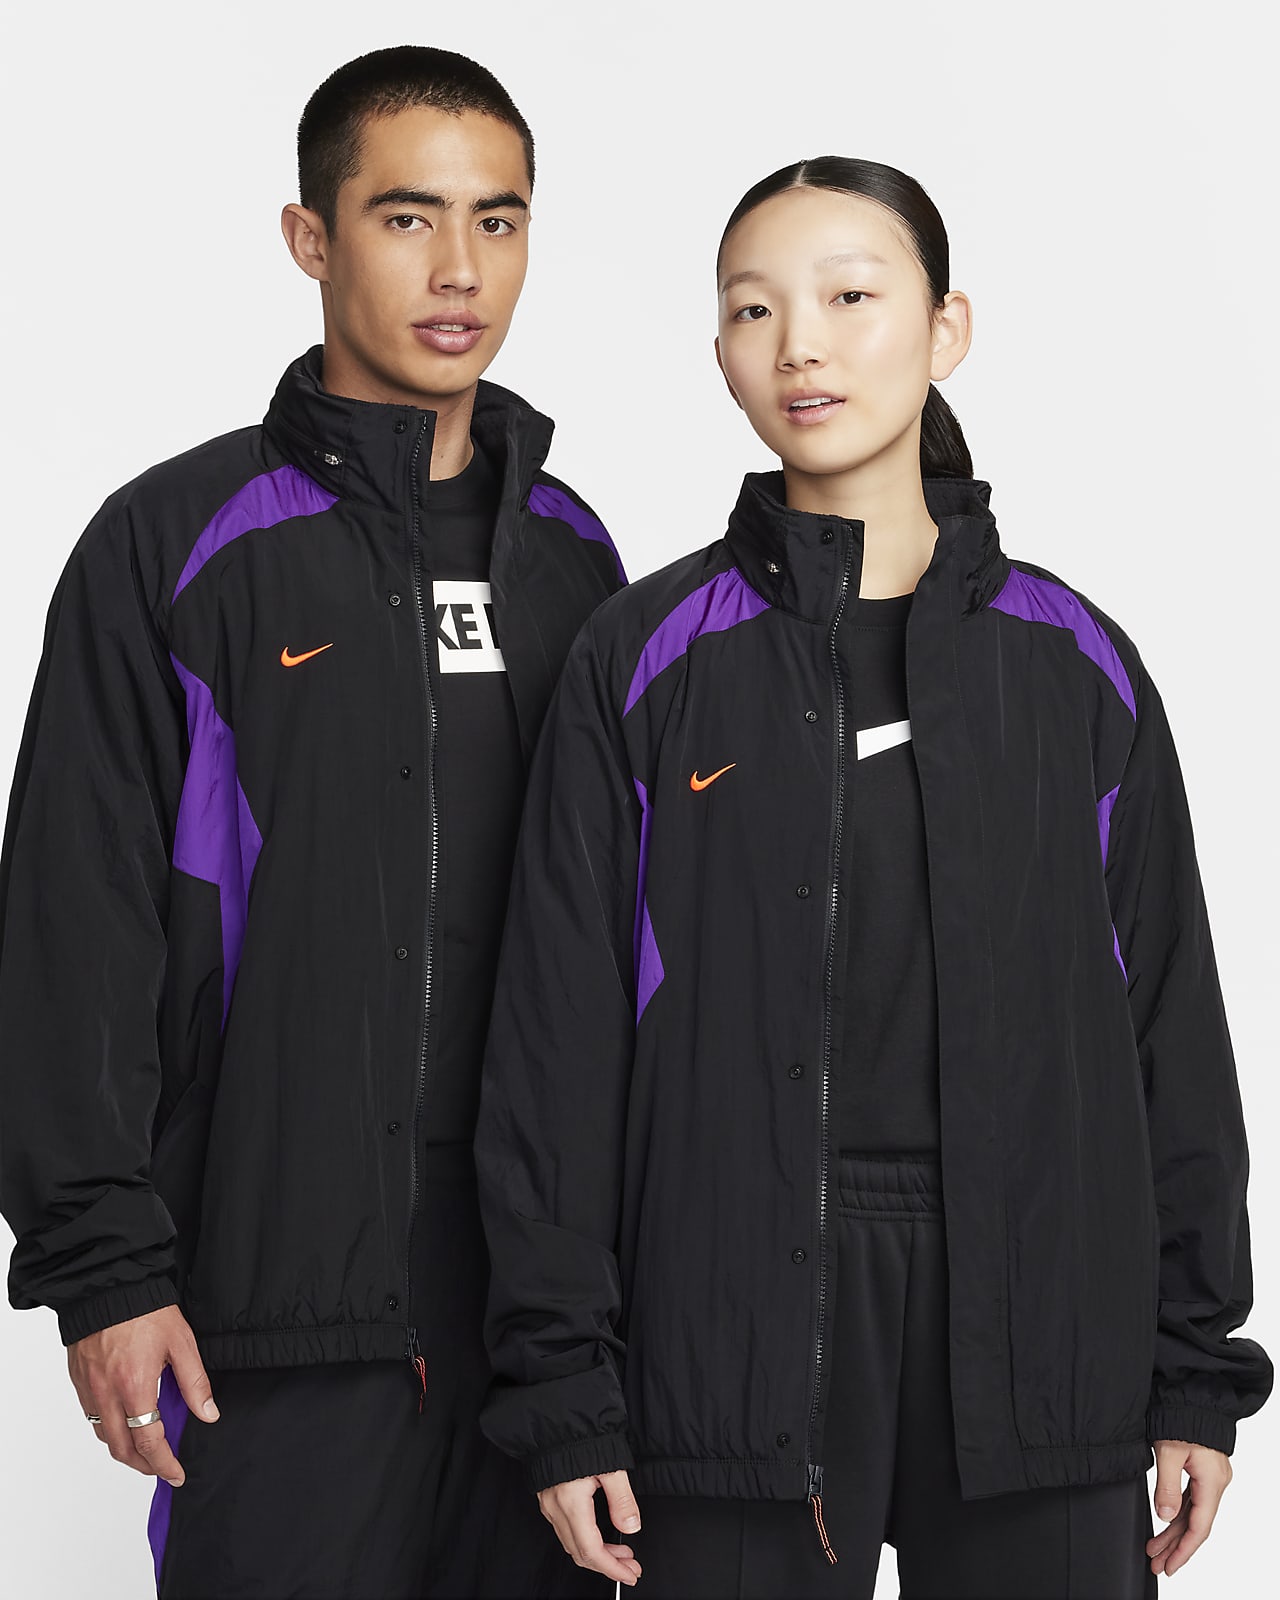 Nike Culture of Football Men's Therma-FIT Repel Hooded Soccer Jacket